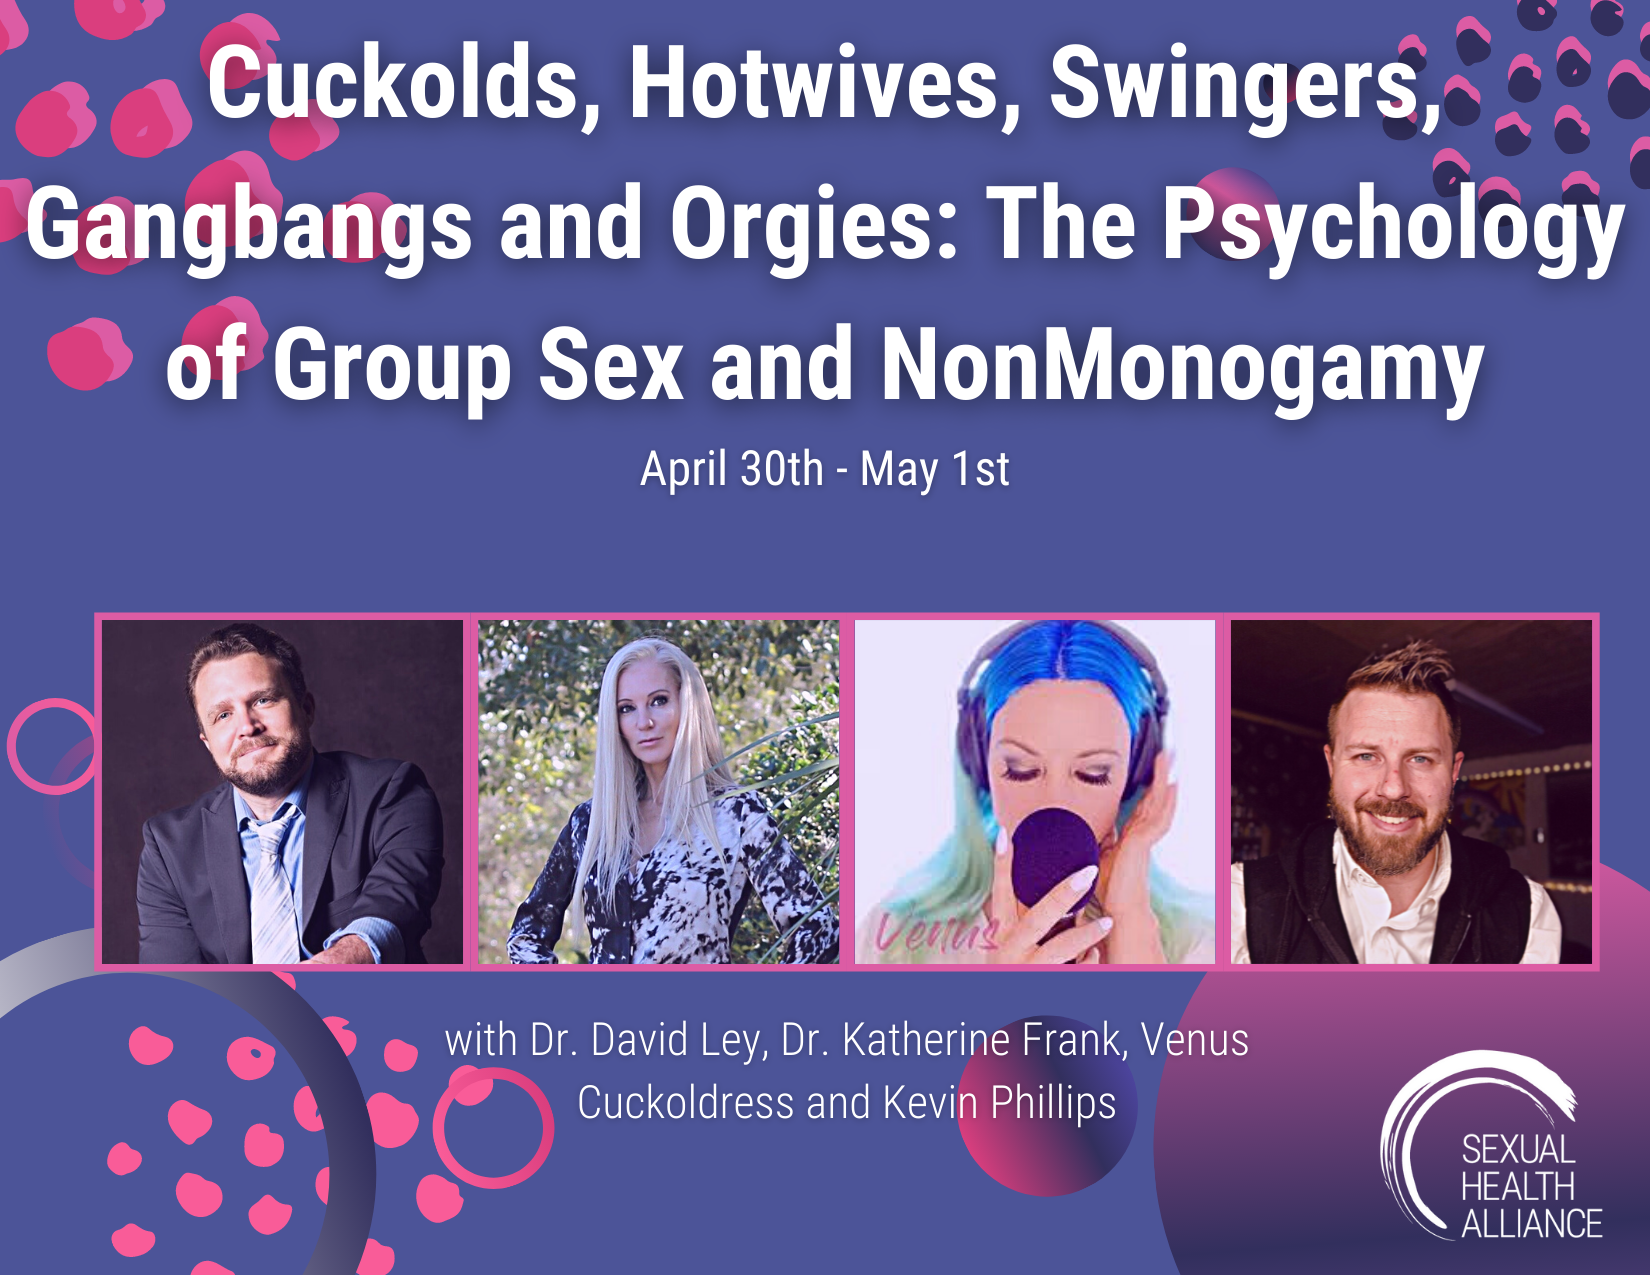 The Psychology of Group Sex and Non-Monogamy Cuckolds, Hotwives, Swingers, Gangbangs and Orgies — Sexual Health Alliance pic